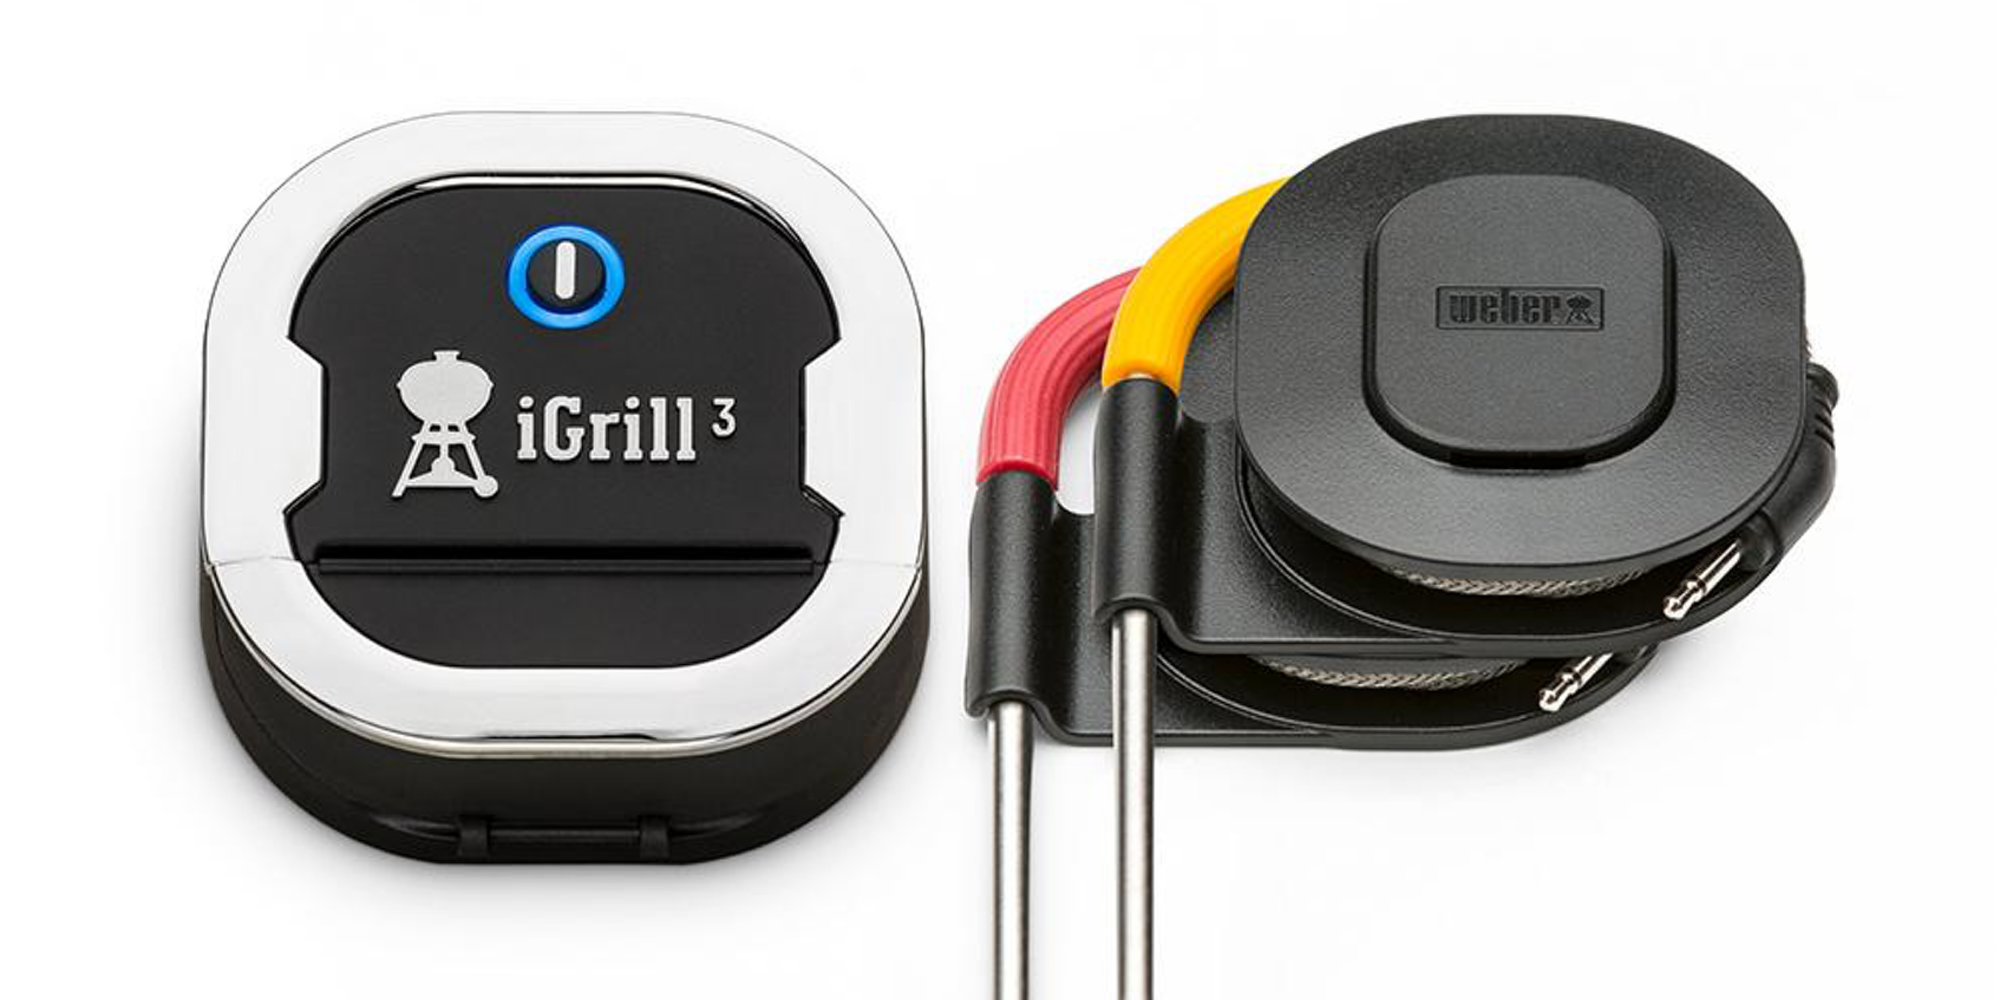 Monitor your food like a real techie: Weber's iGrill 3 Smart Thermometer  $69.50 (Reg. $85+)